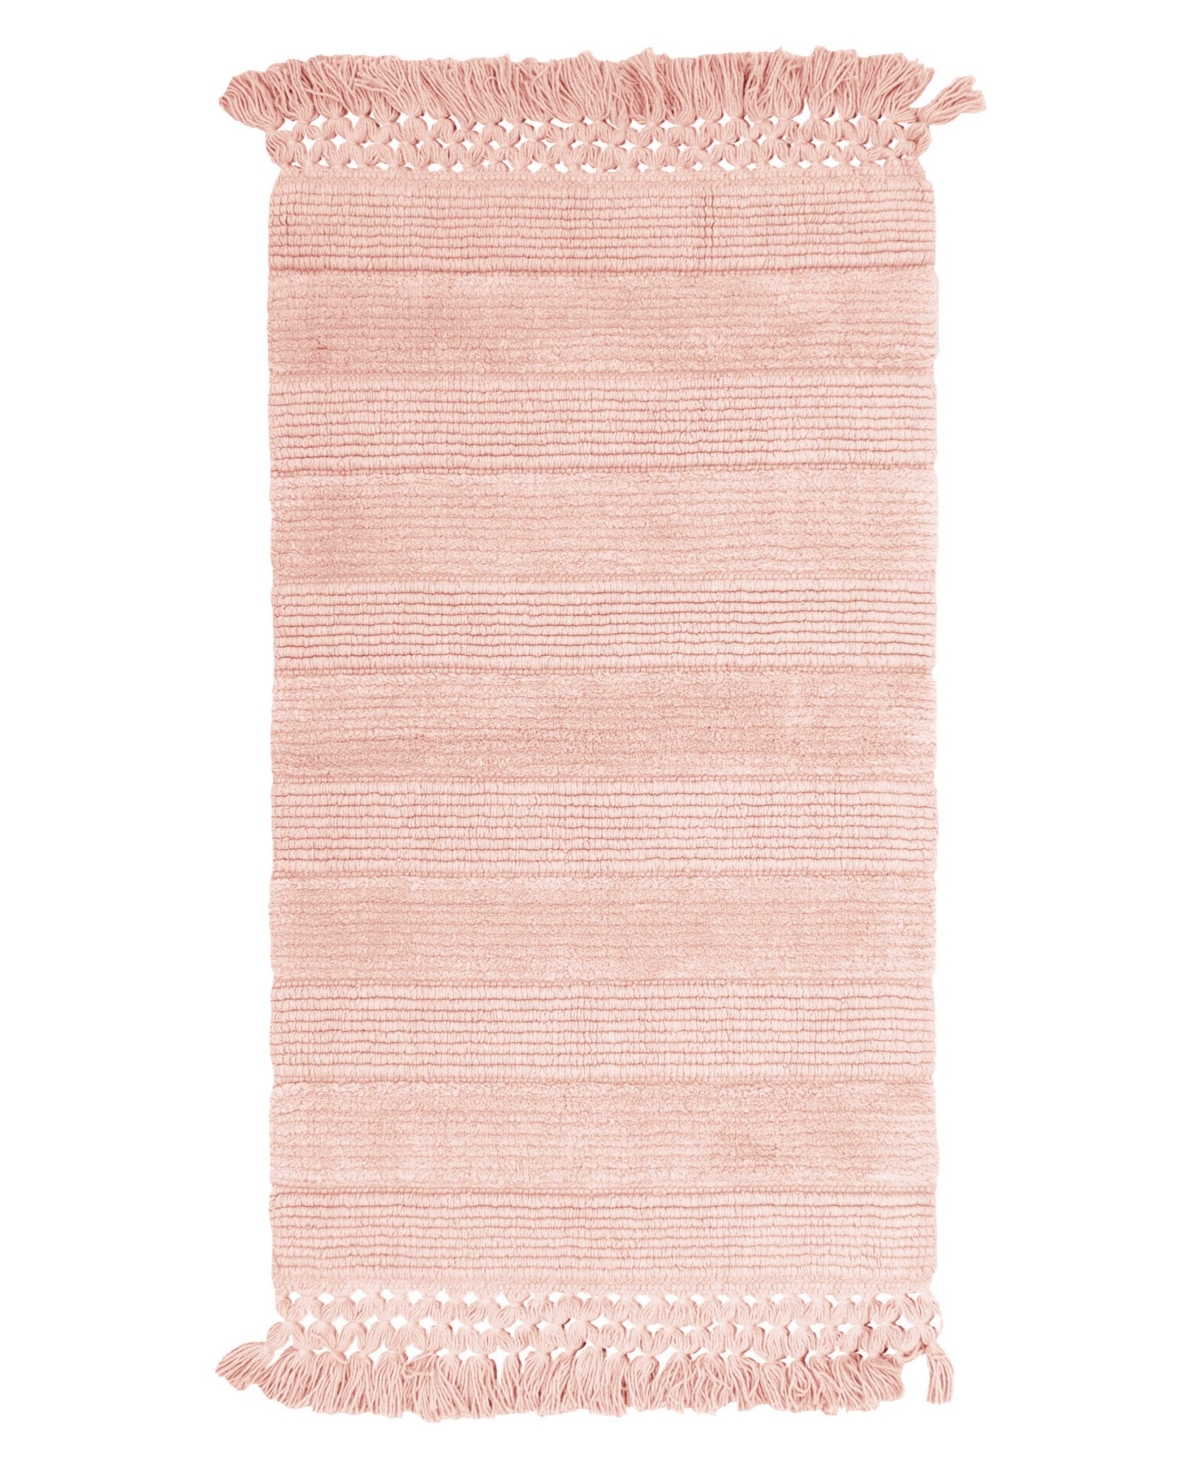 French Connection Safira Fringe Cotton Bath Rug Collection Bedding In Blush